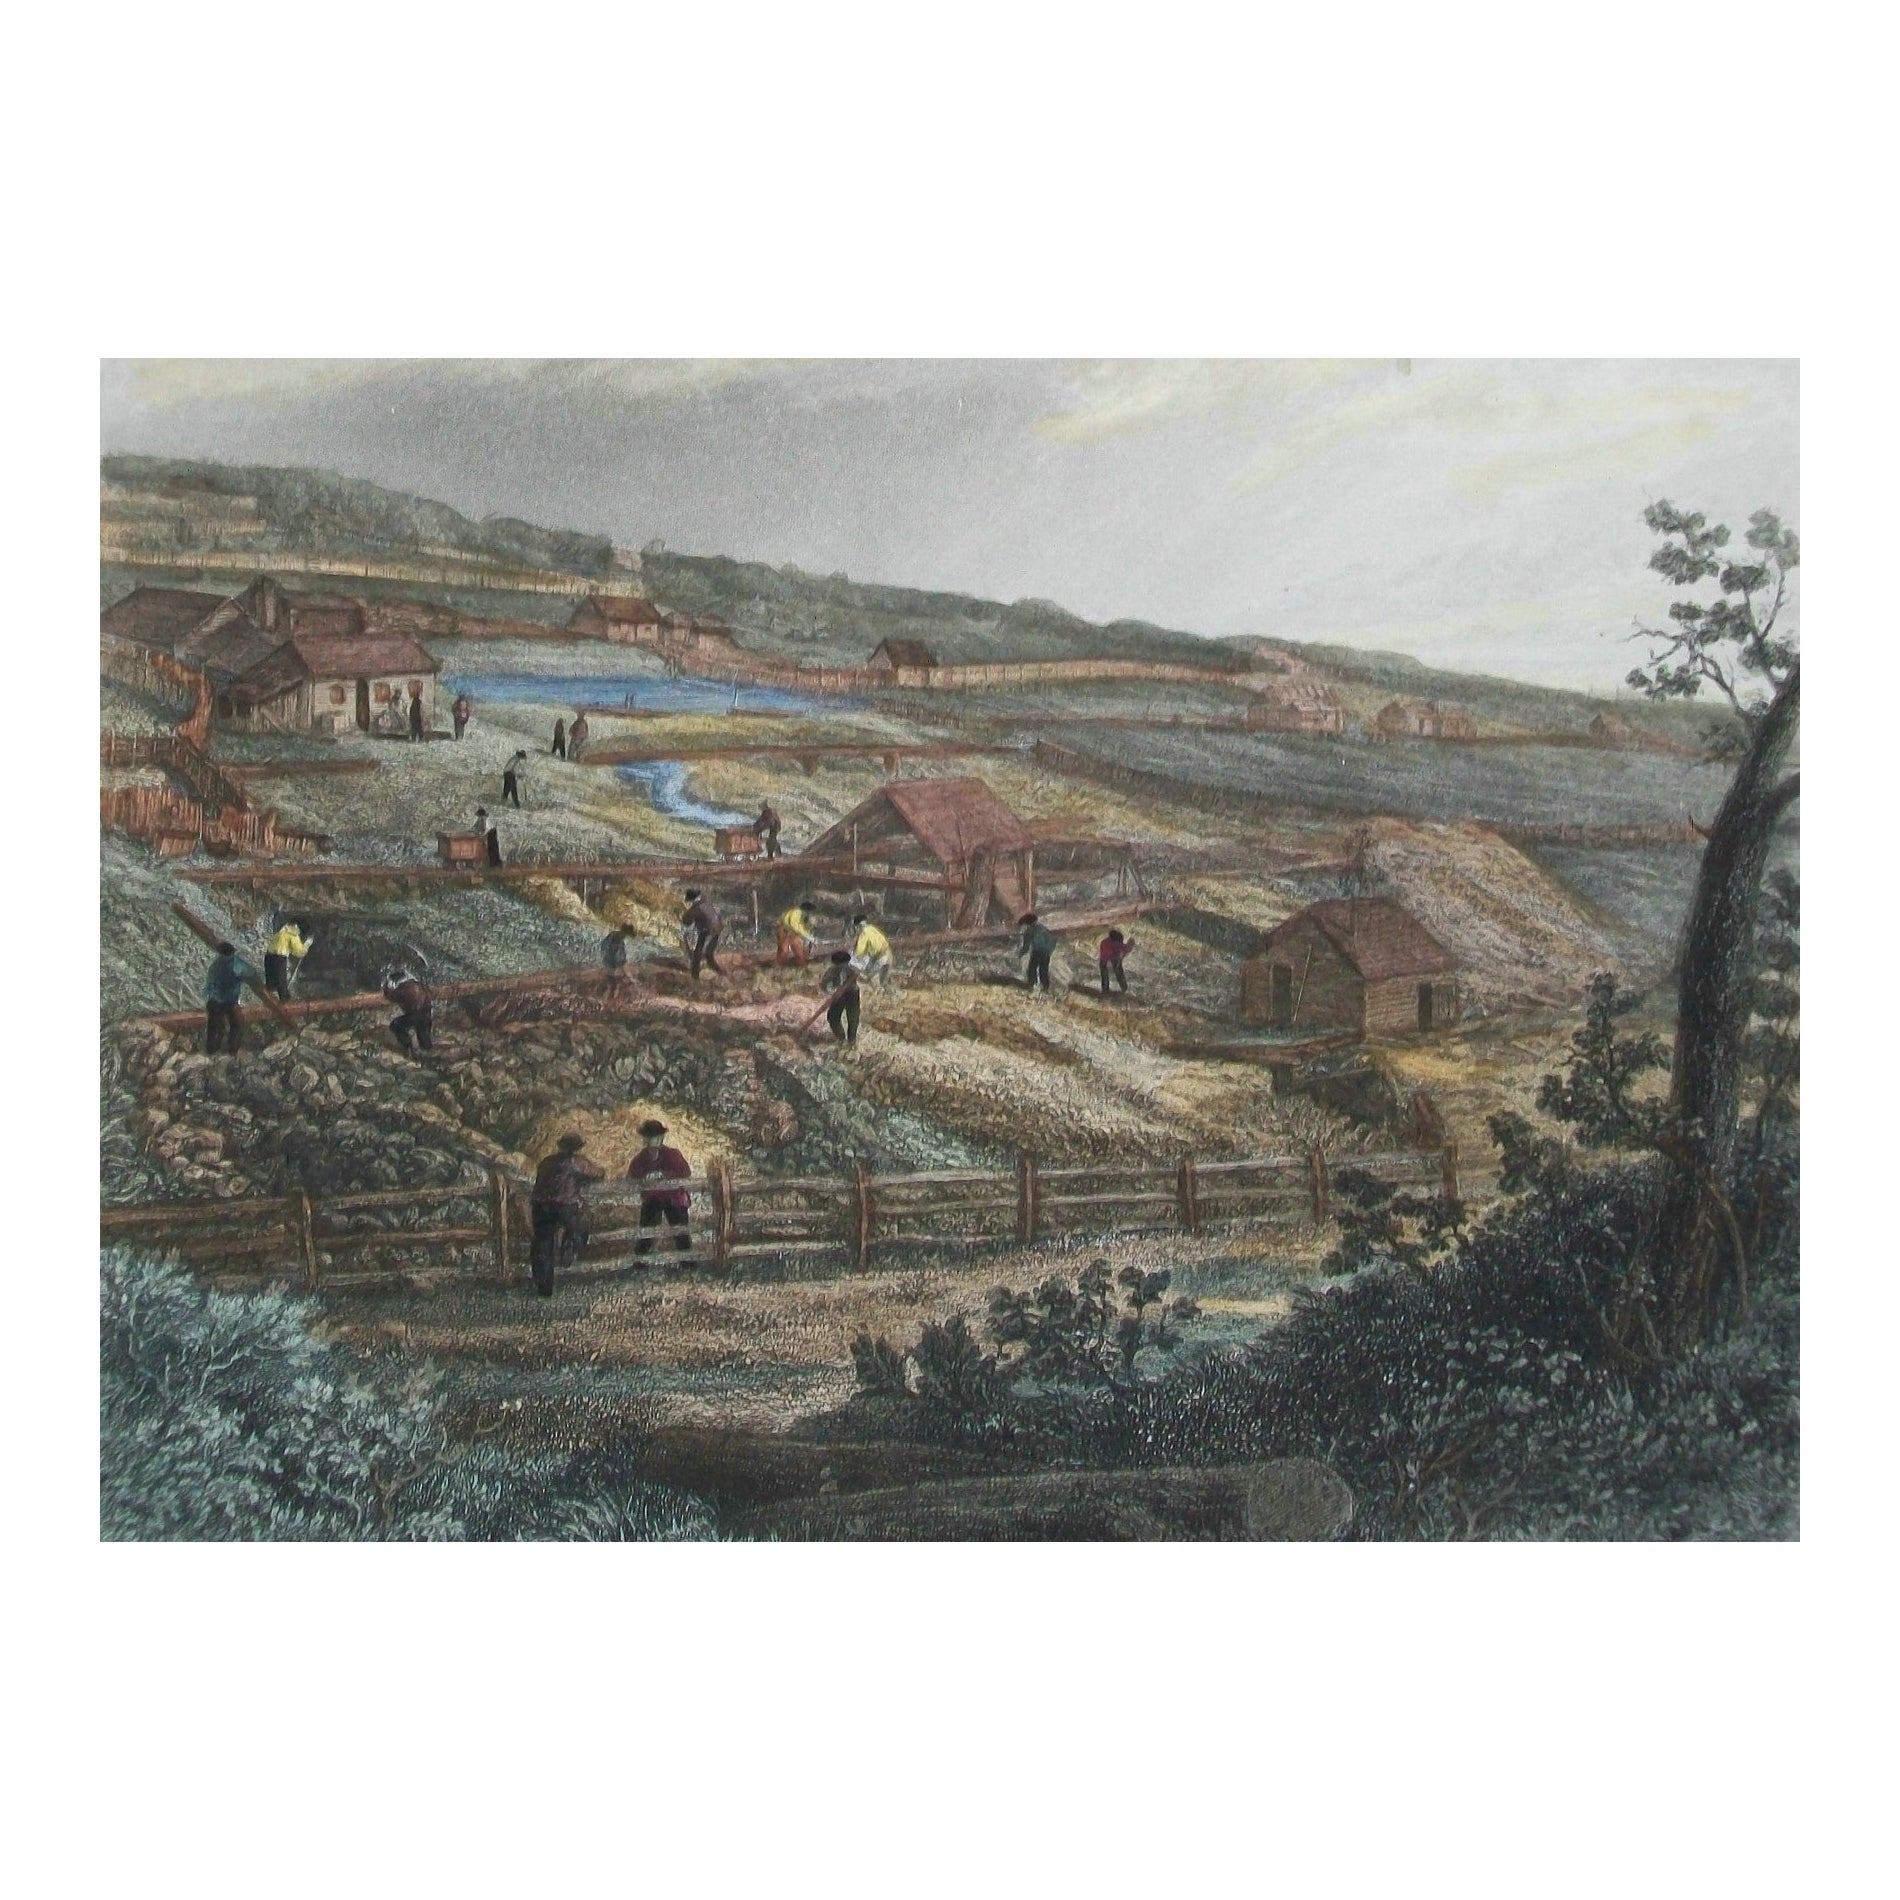 J.C. Armytage, 'Concordia Gold Mines', Hand Colored Engraving, U.K., C.1874 For Sale